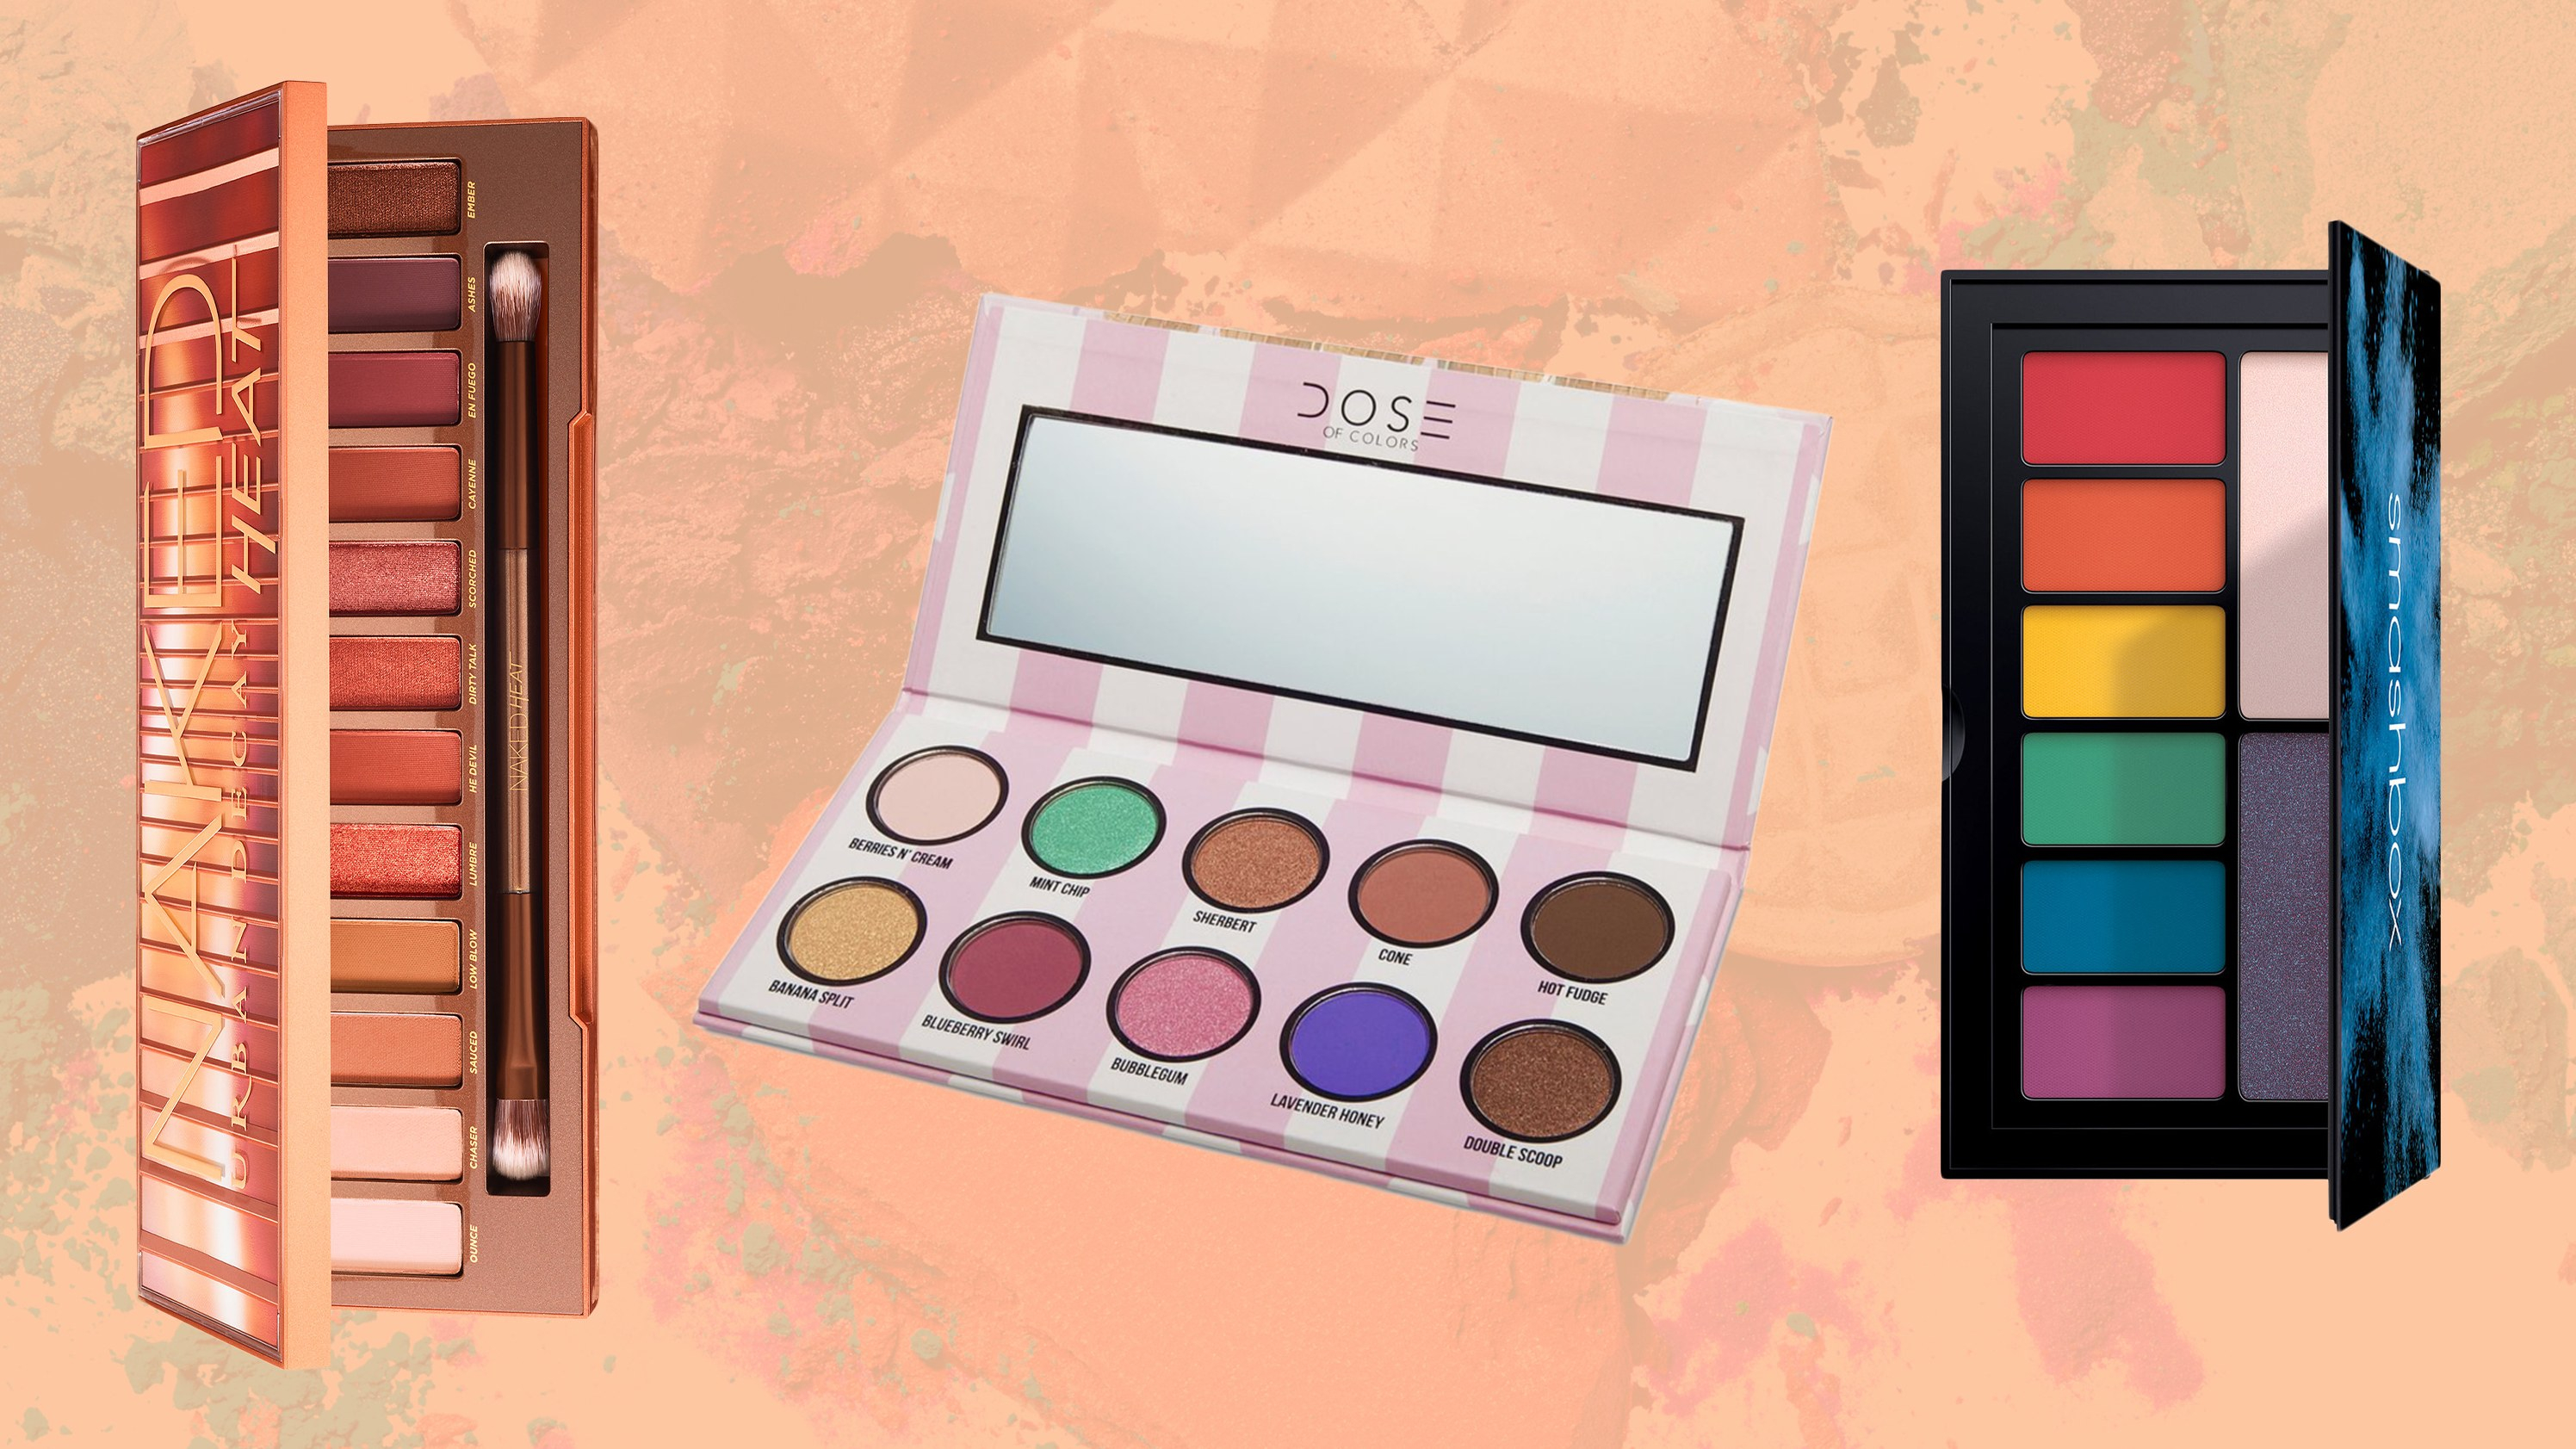 Swirl Eye Makeup These Are The Most Pigmented Eyeshadows For Every Budget Allure